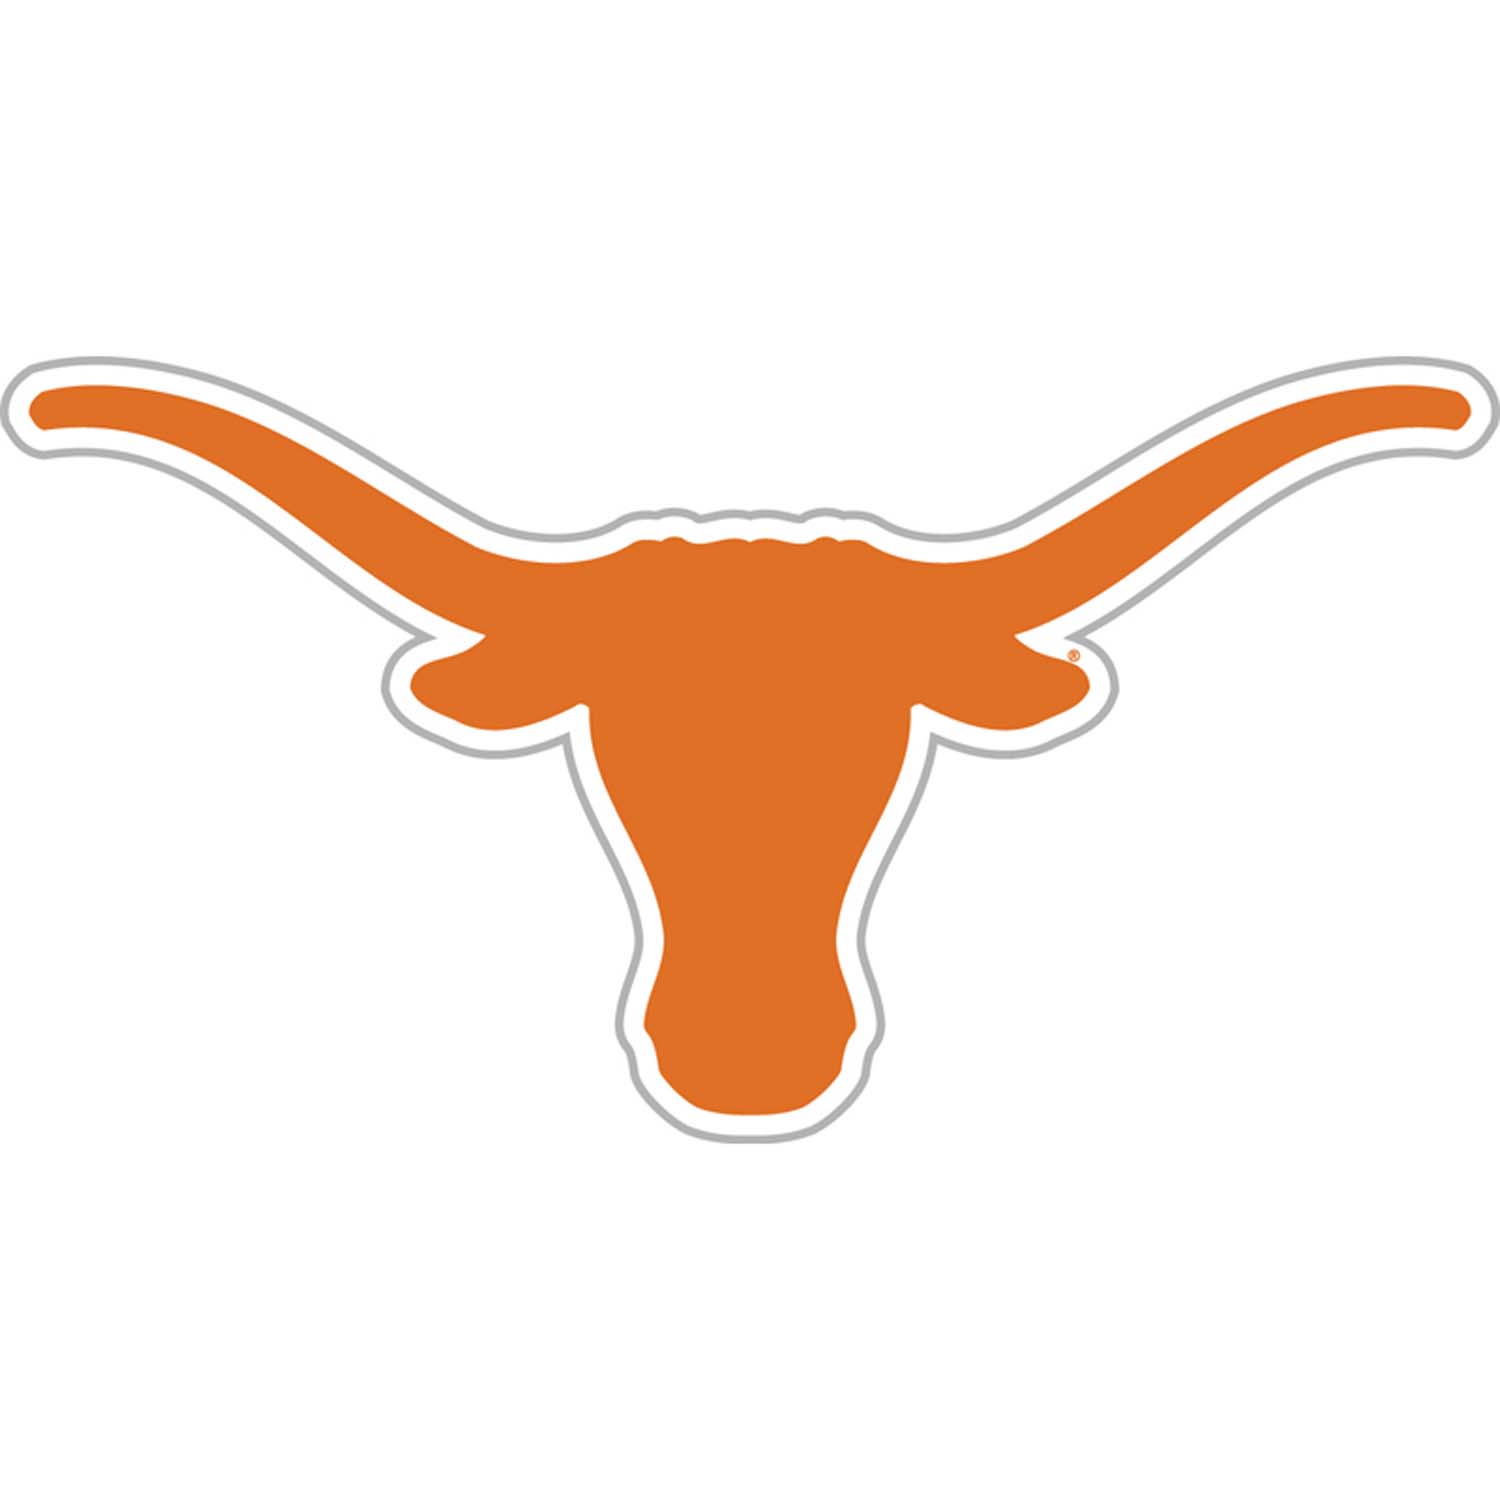 Texas Longhorn Logos Find At Findthatlogo The Search